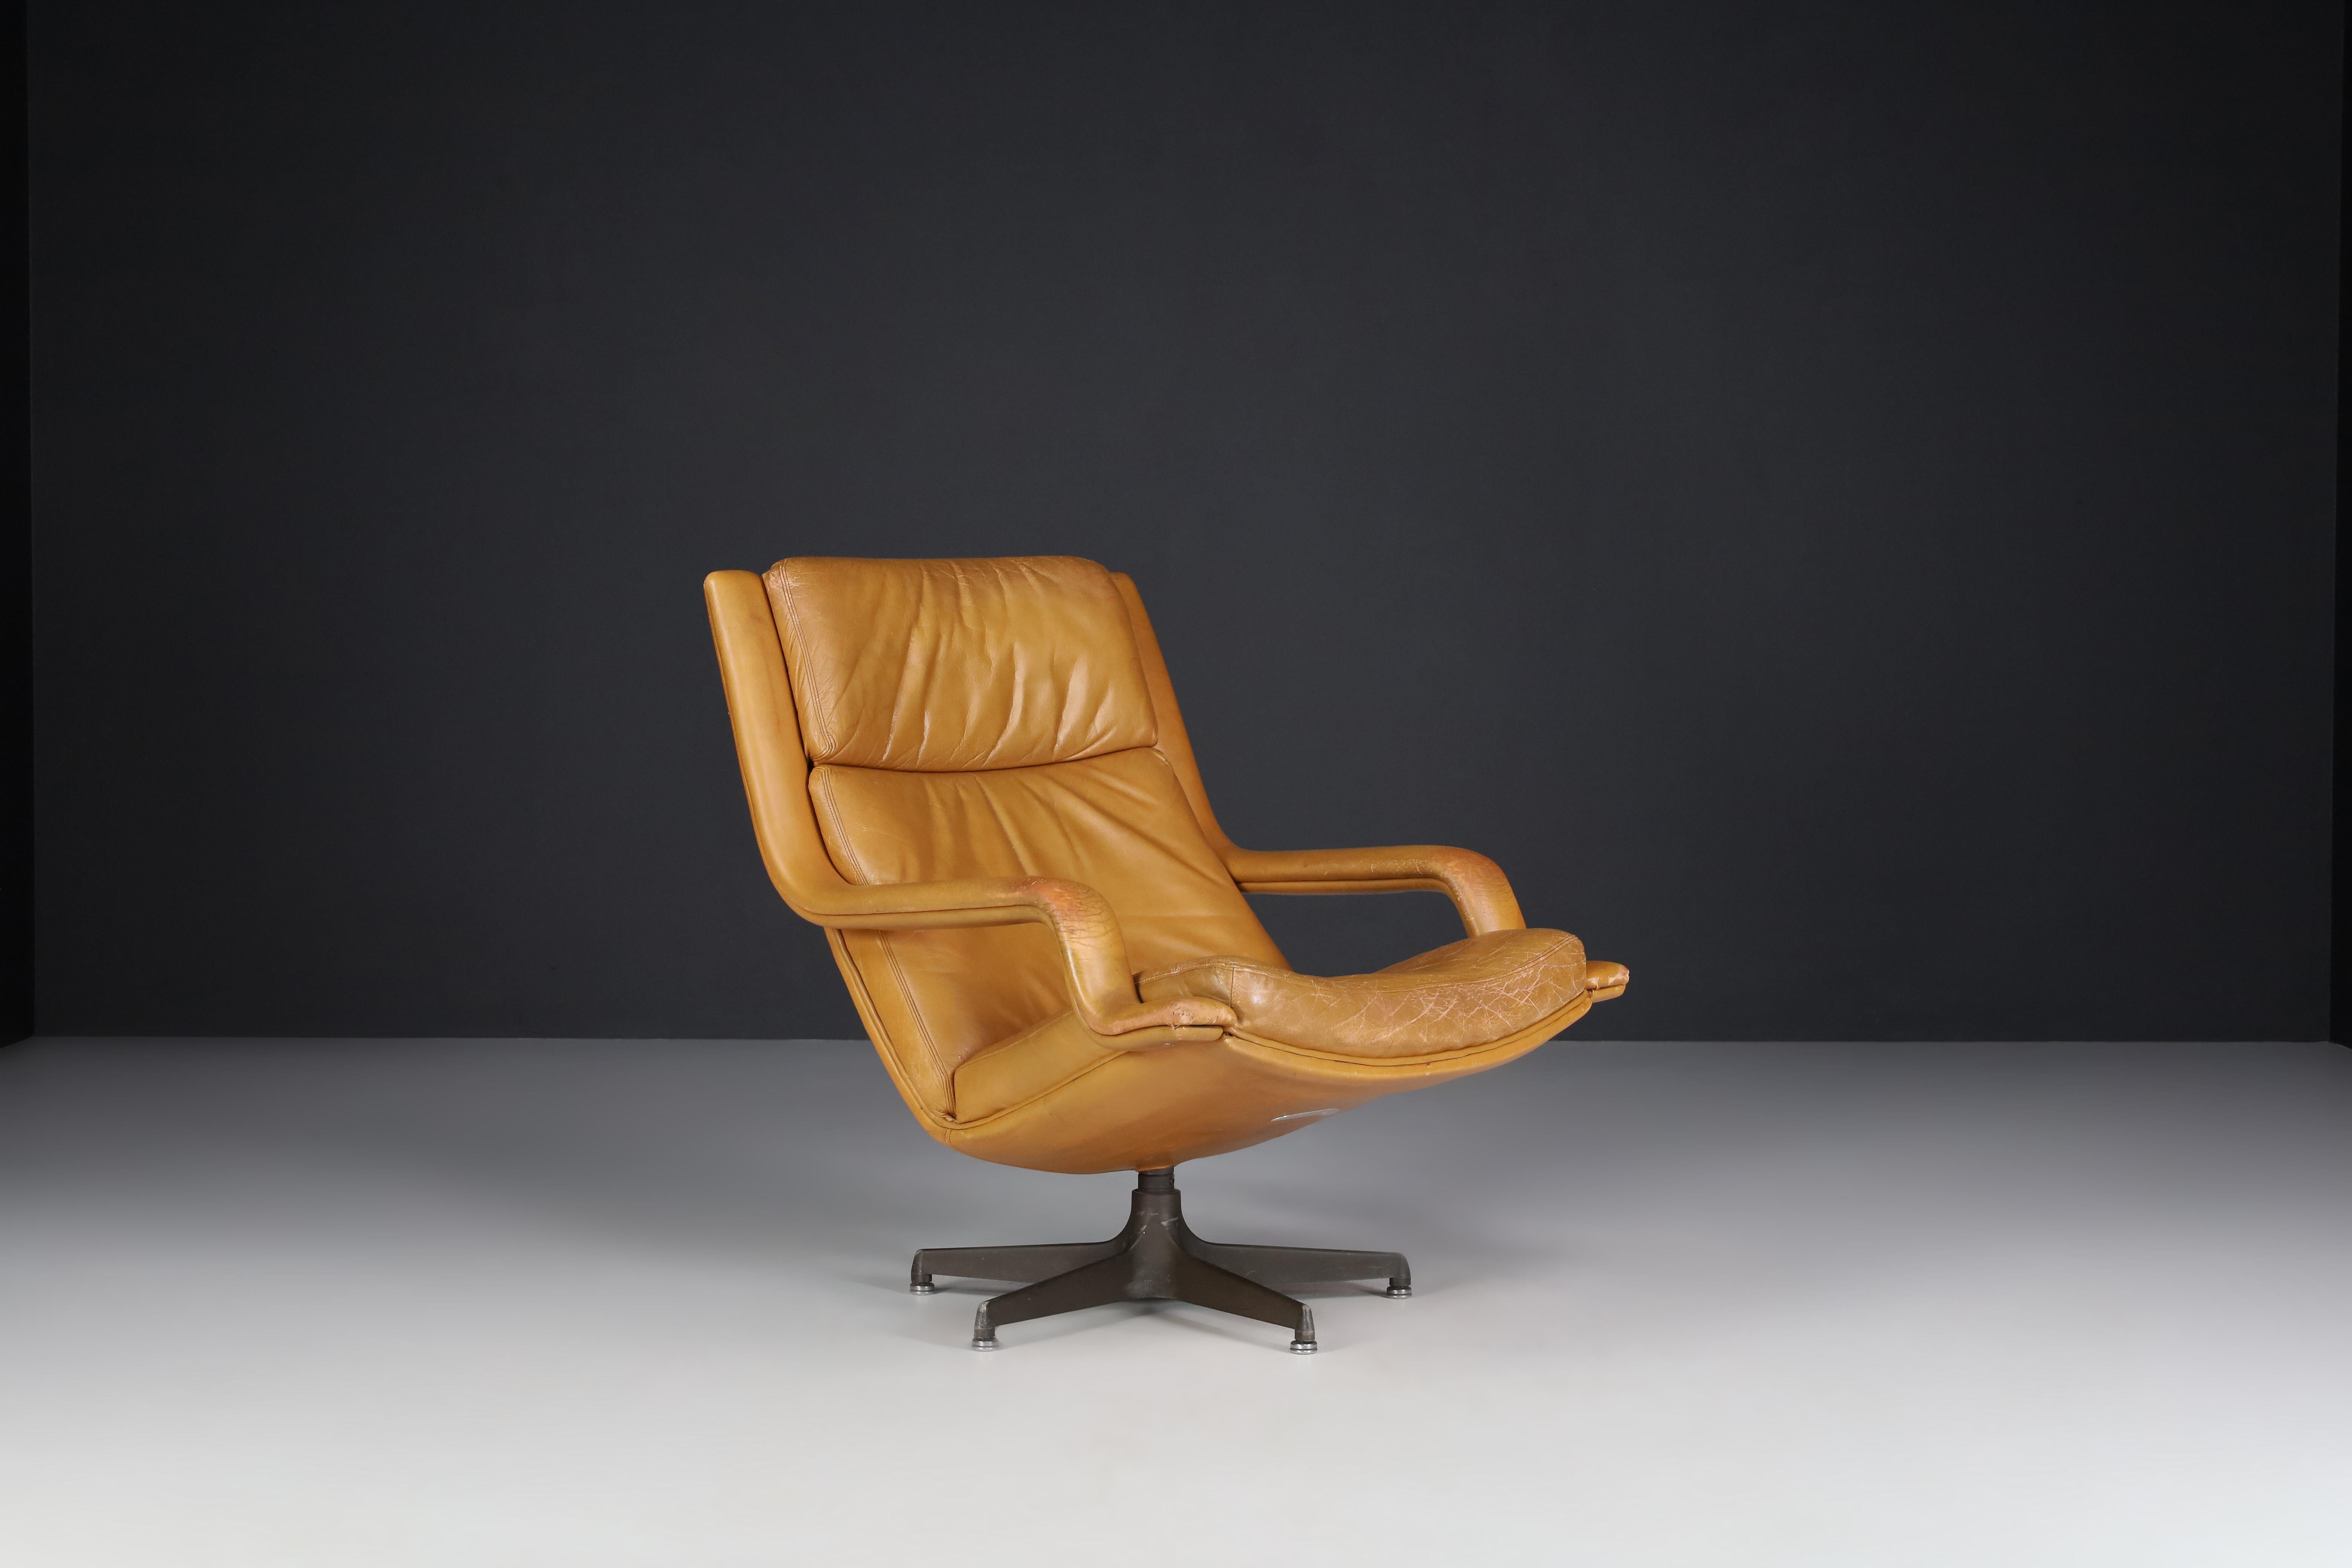 Geoffrey Harcourt Patinated Cognac Leather Swivel Lounge Chair, The Netherlands 1970s

Patinated cognac leather Artifort F141 Swivel lounge chair designed by Geoffrey Harcourt mid-1970s. In beautiful patinated cognac leather upholstery with a